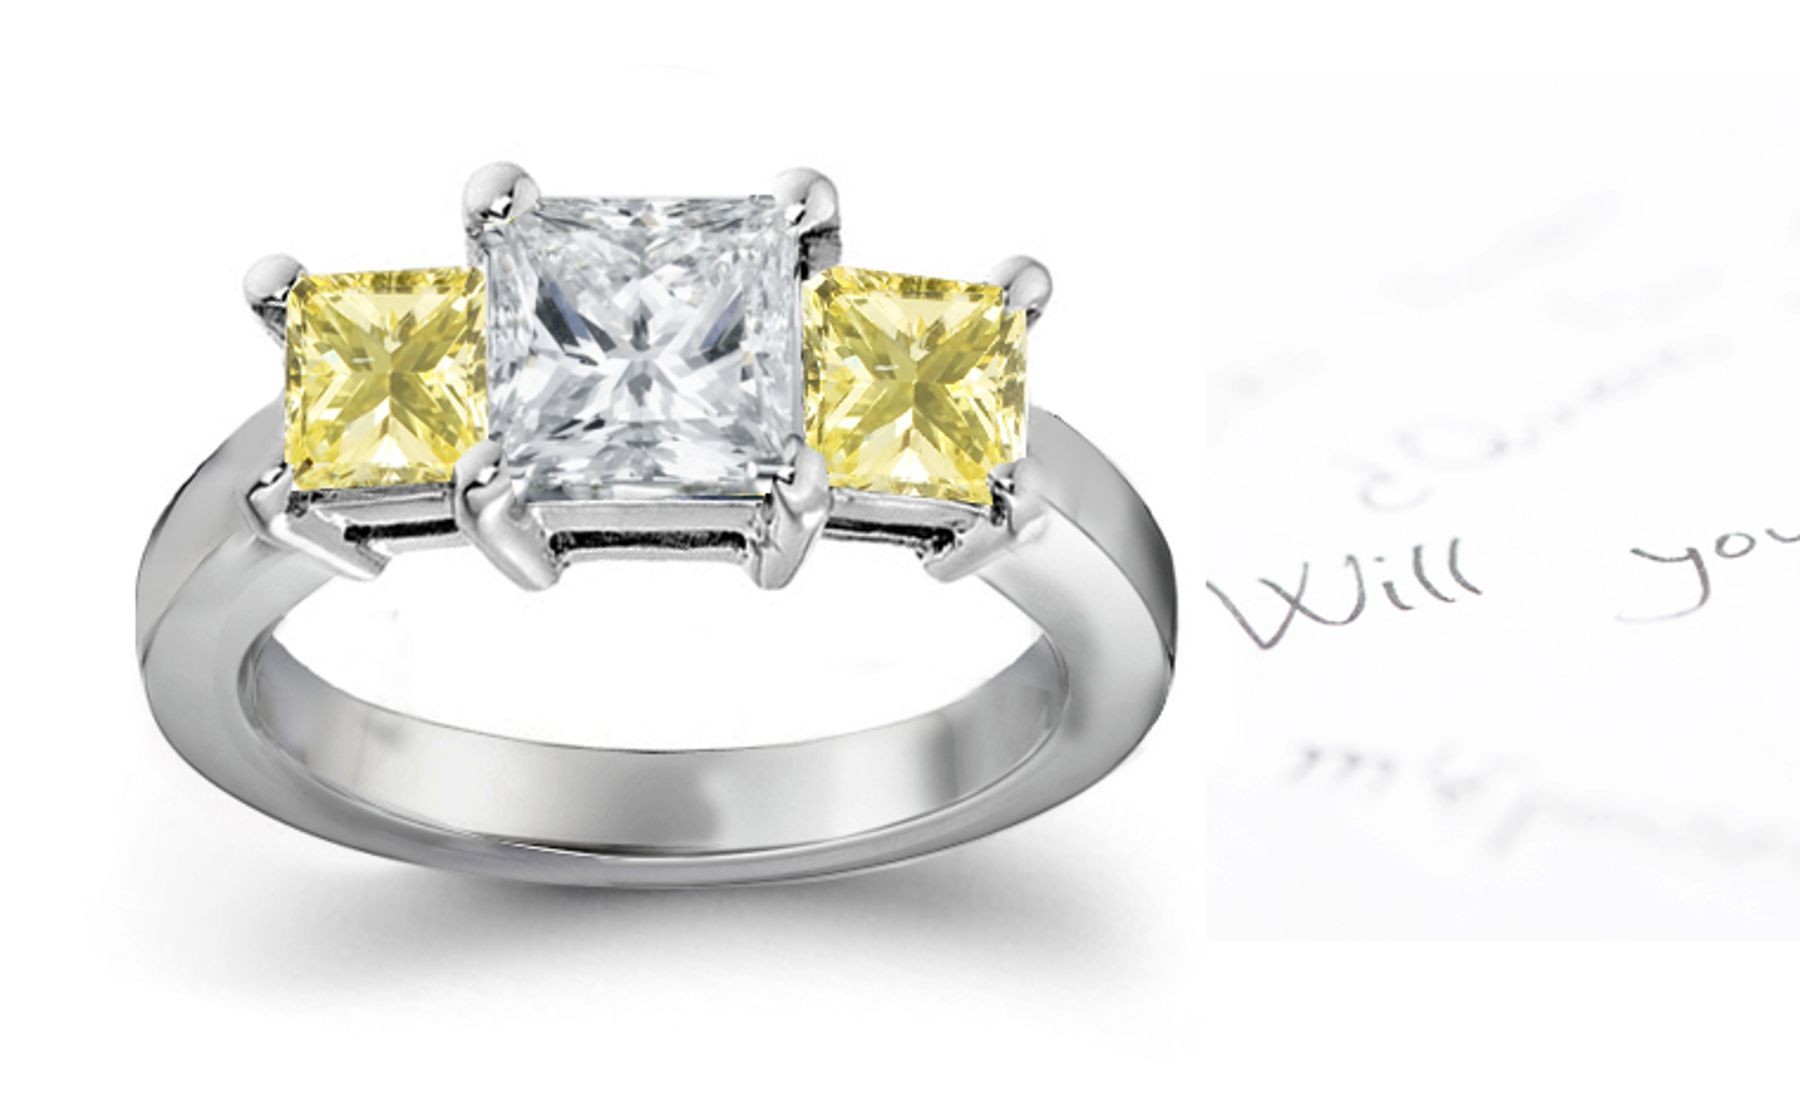 Premier Colored Diamonds Designer Collection - Yellow Colored Diamonds & White Diamonds Fancy Diamond Three Stone Engagement Rings